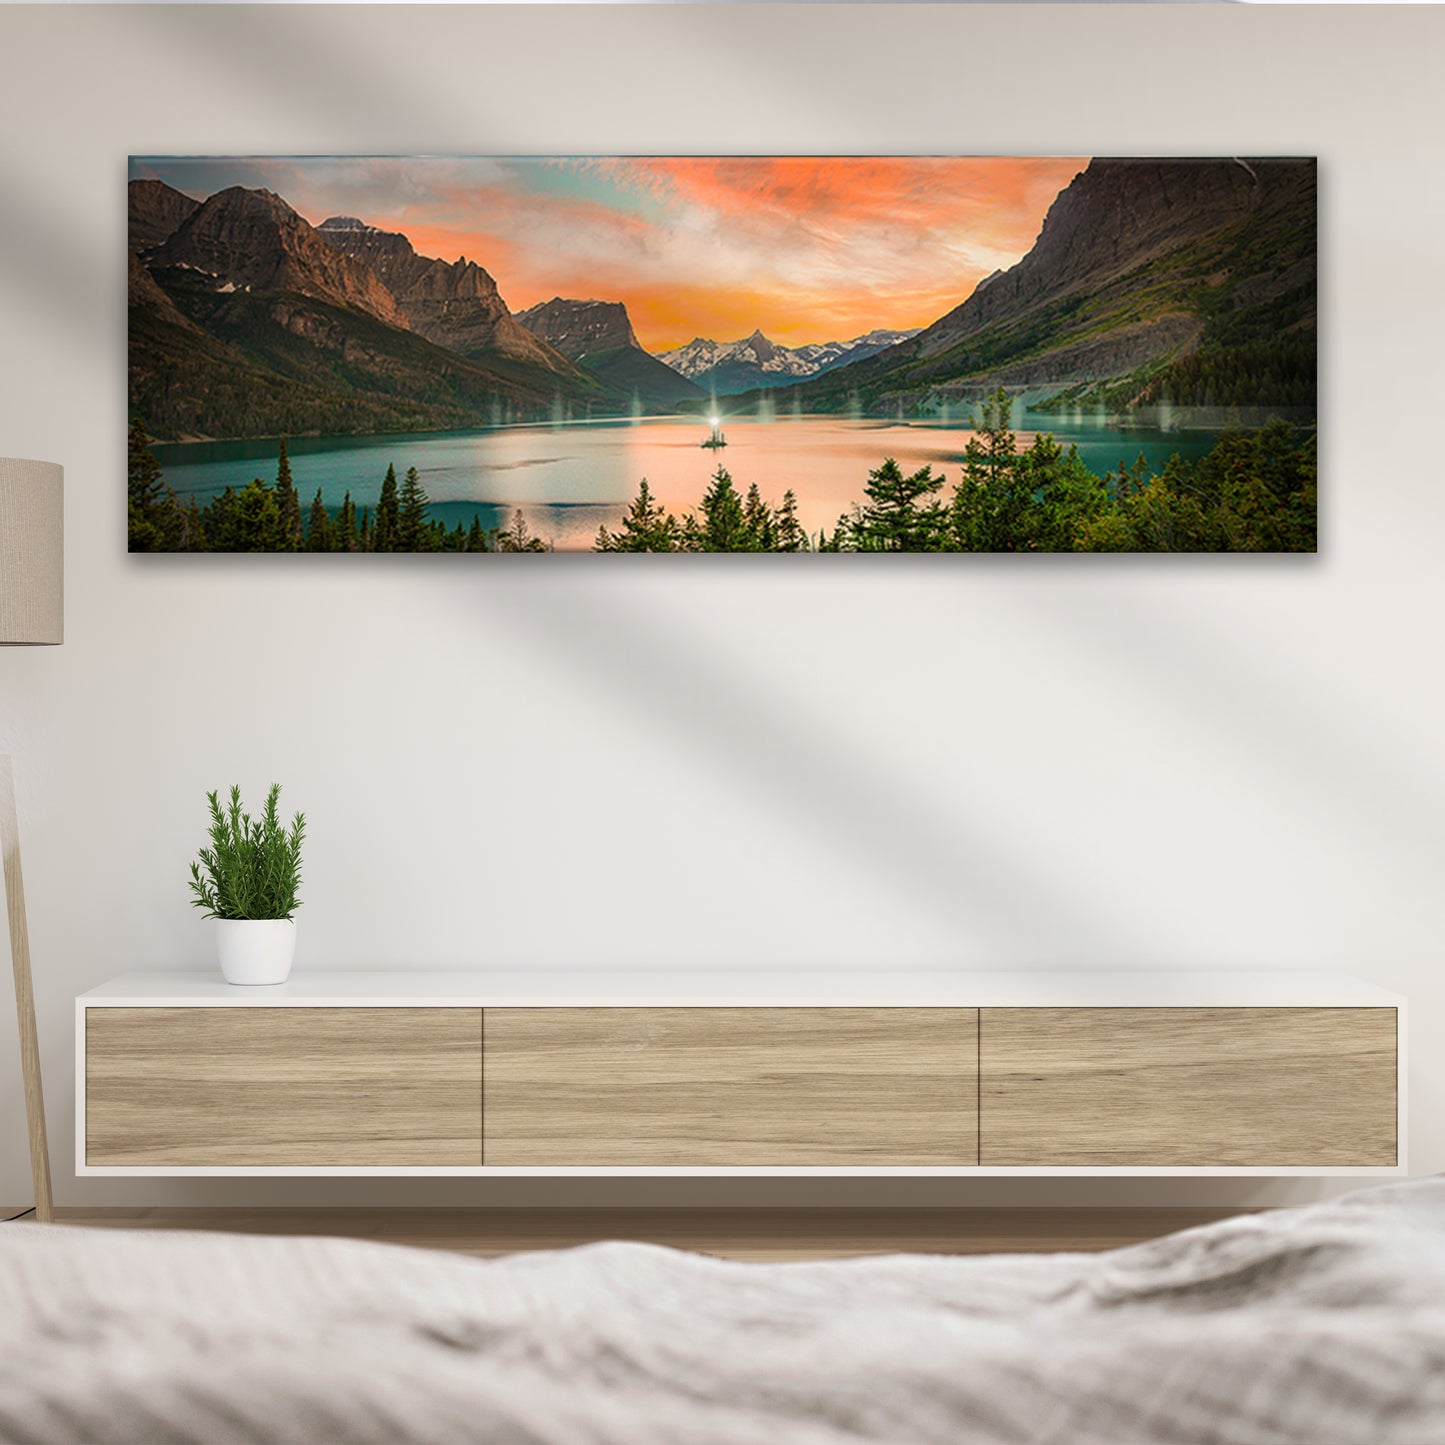 Calm Afternoon Middle Lake Canvas Wall Art - Image by Tailored Canvases